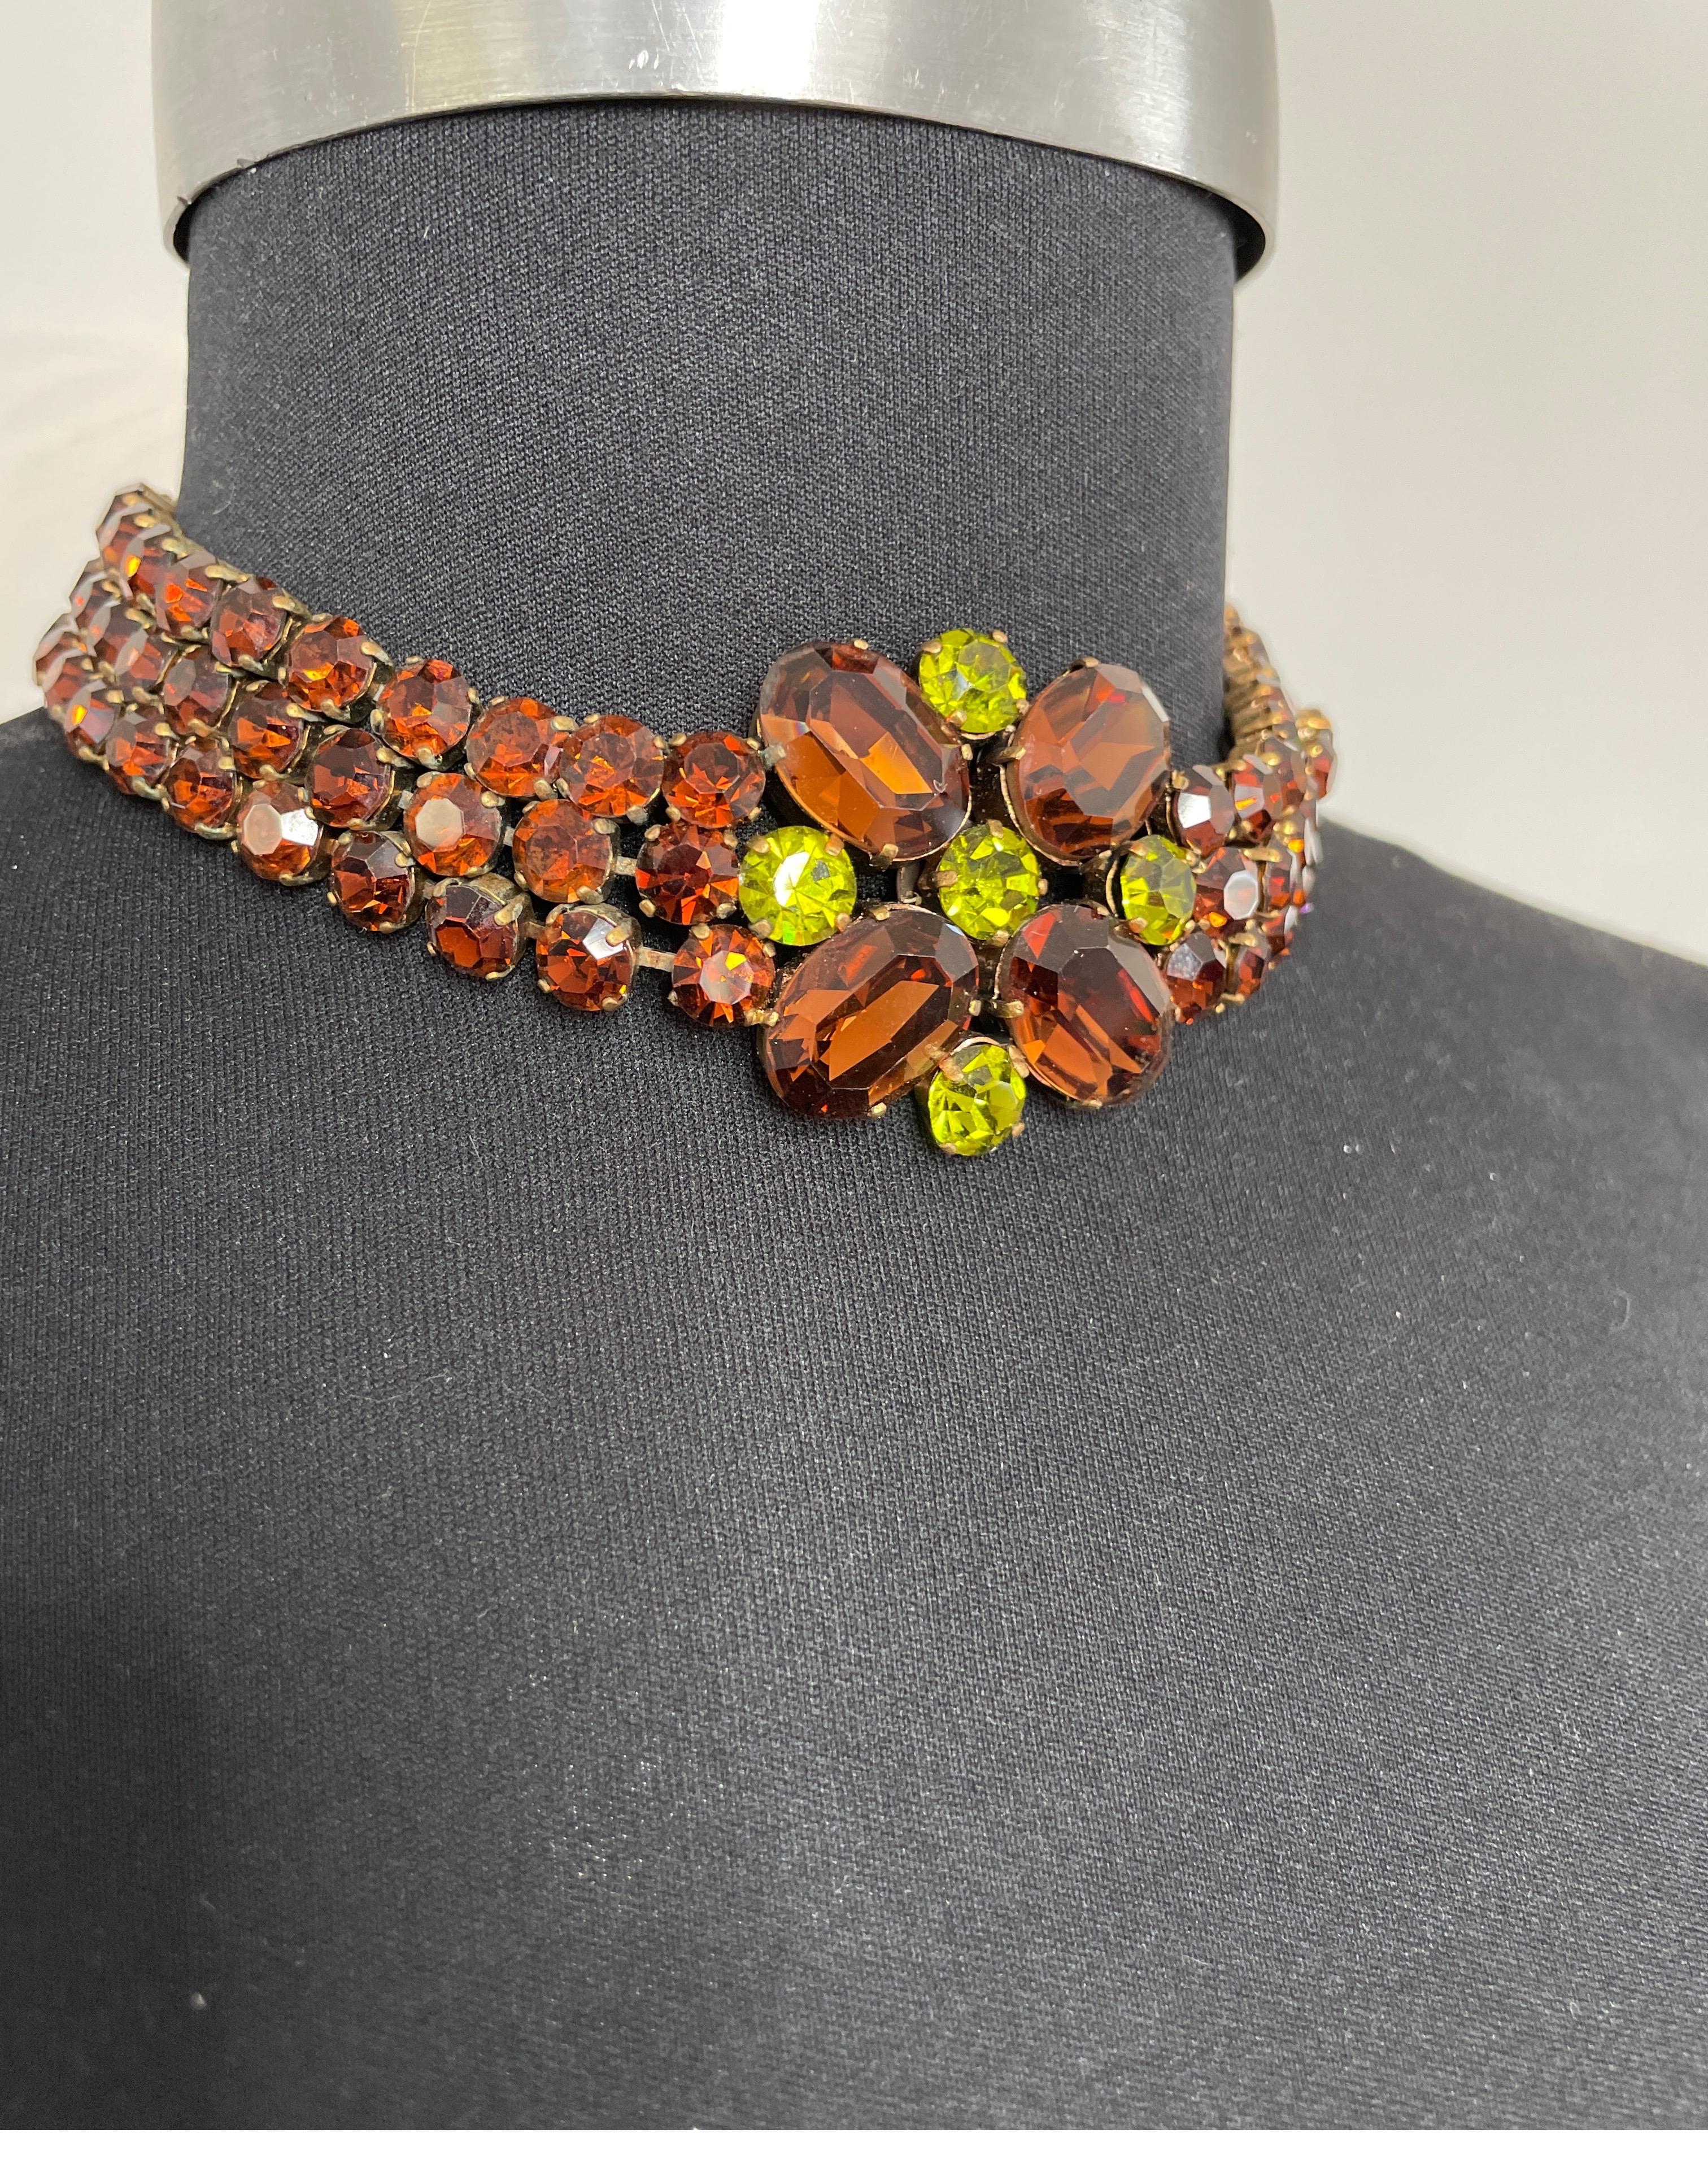 Women's Dominique Aurientis Brown Green Rhinestone Necklace, Never Worn 1980s For Sale